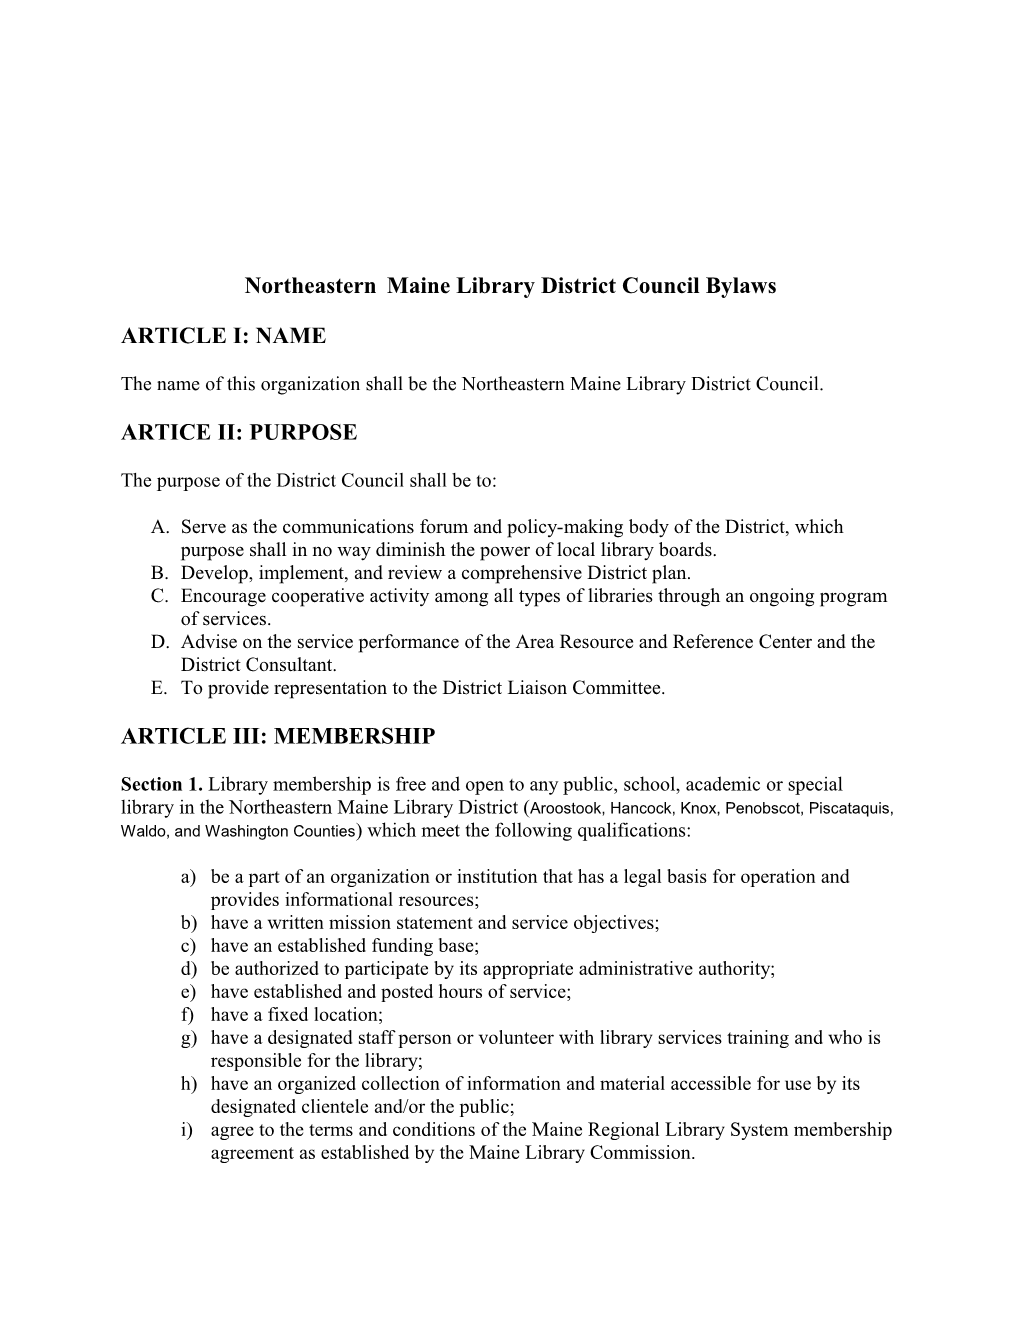 Northeasternmaine Library District Council Bylaws